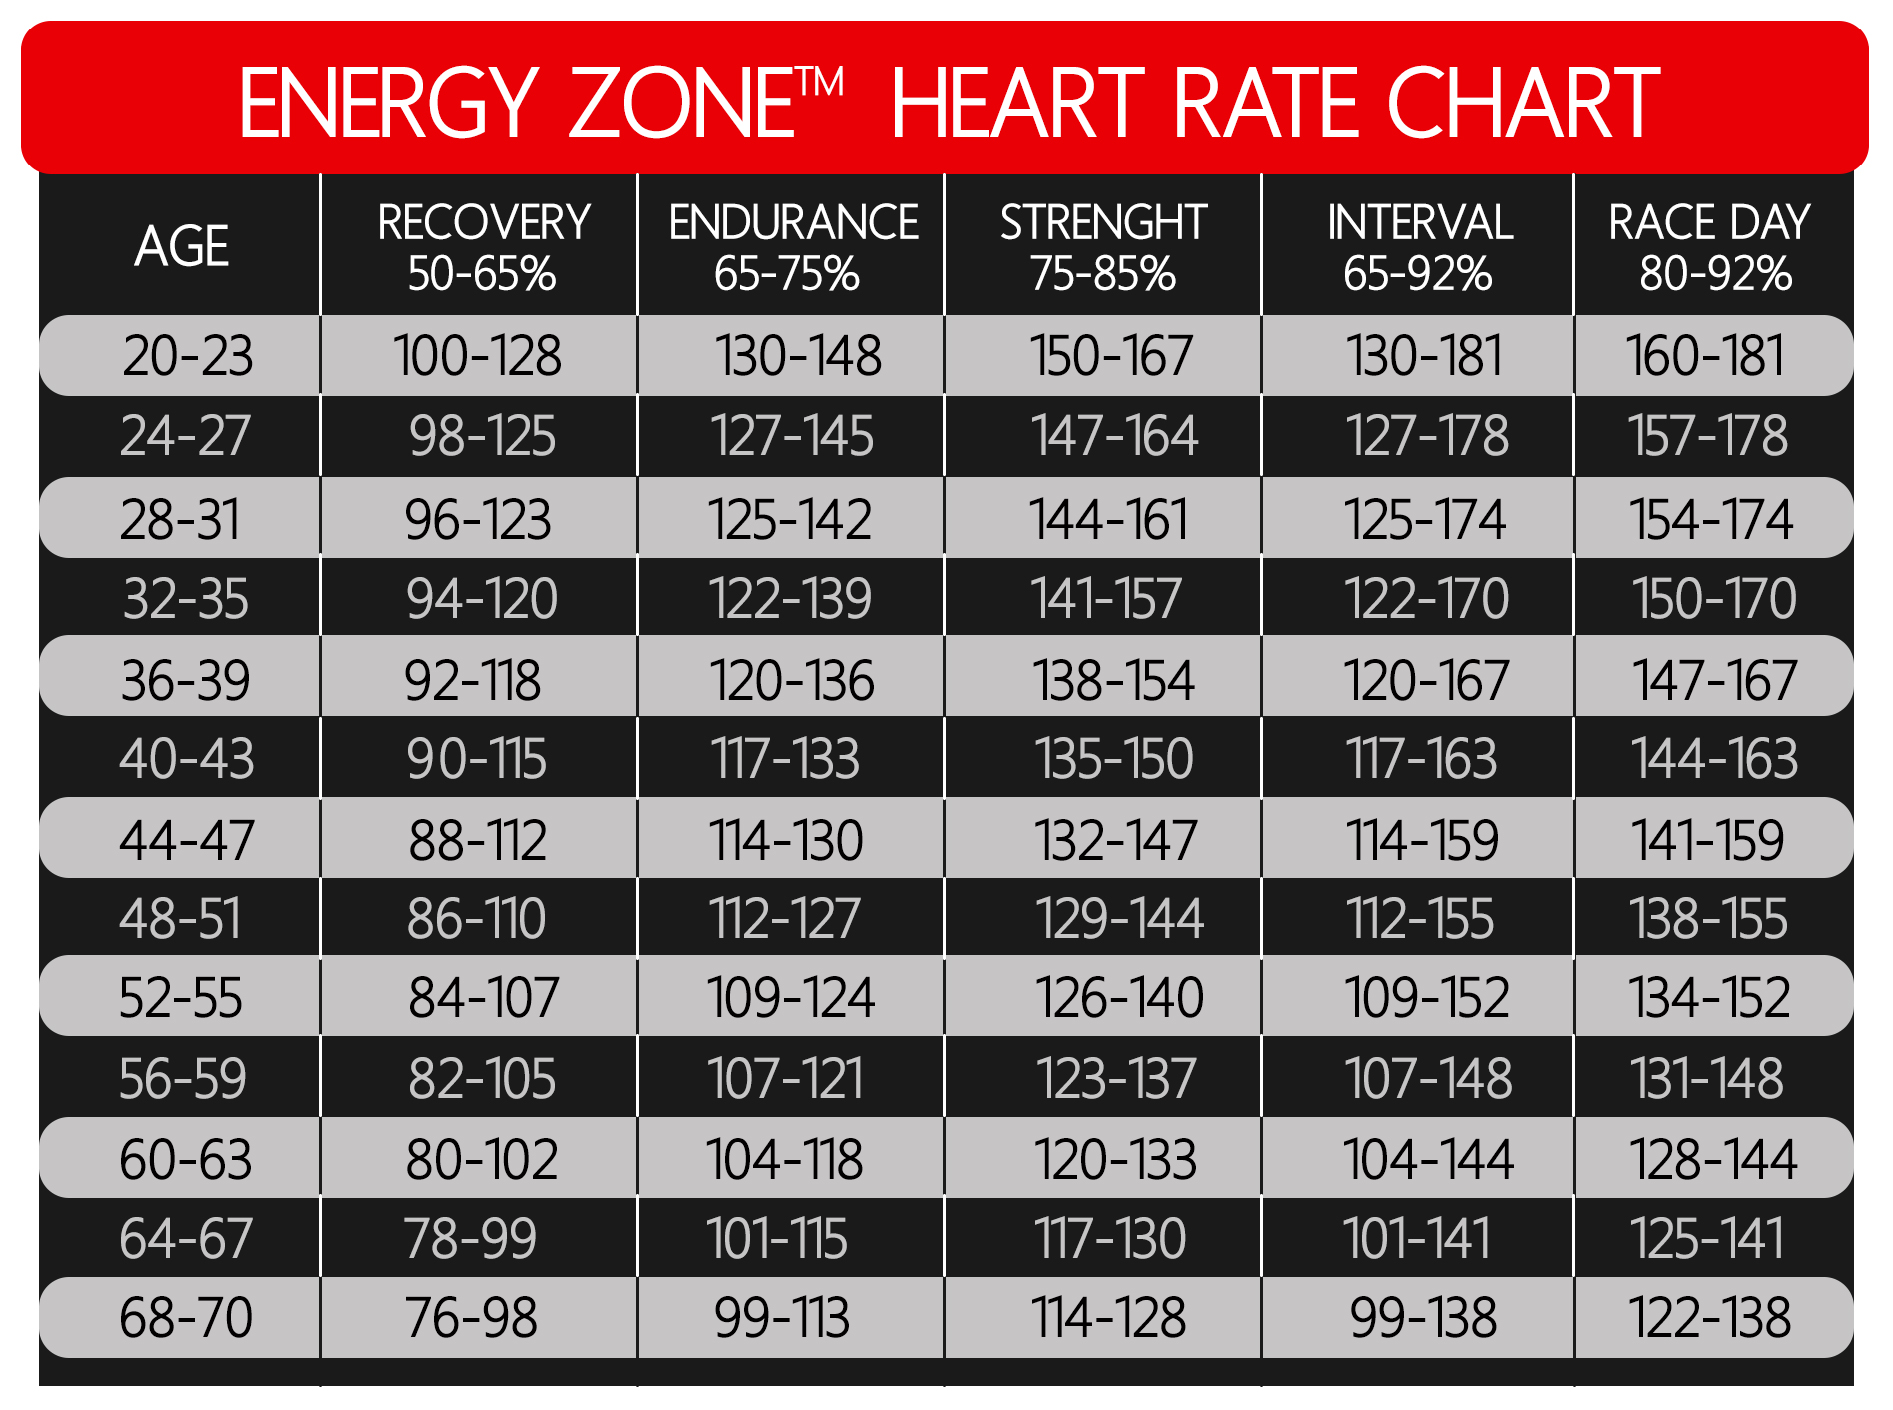 A Quick Reference Guide To Spinning Energy Zones For Heart Rate in Cycling Heart Rate Zones